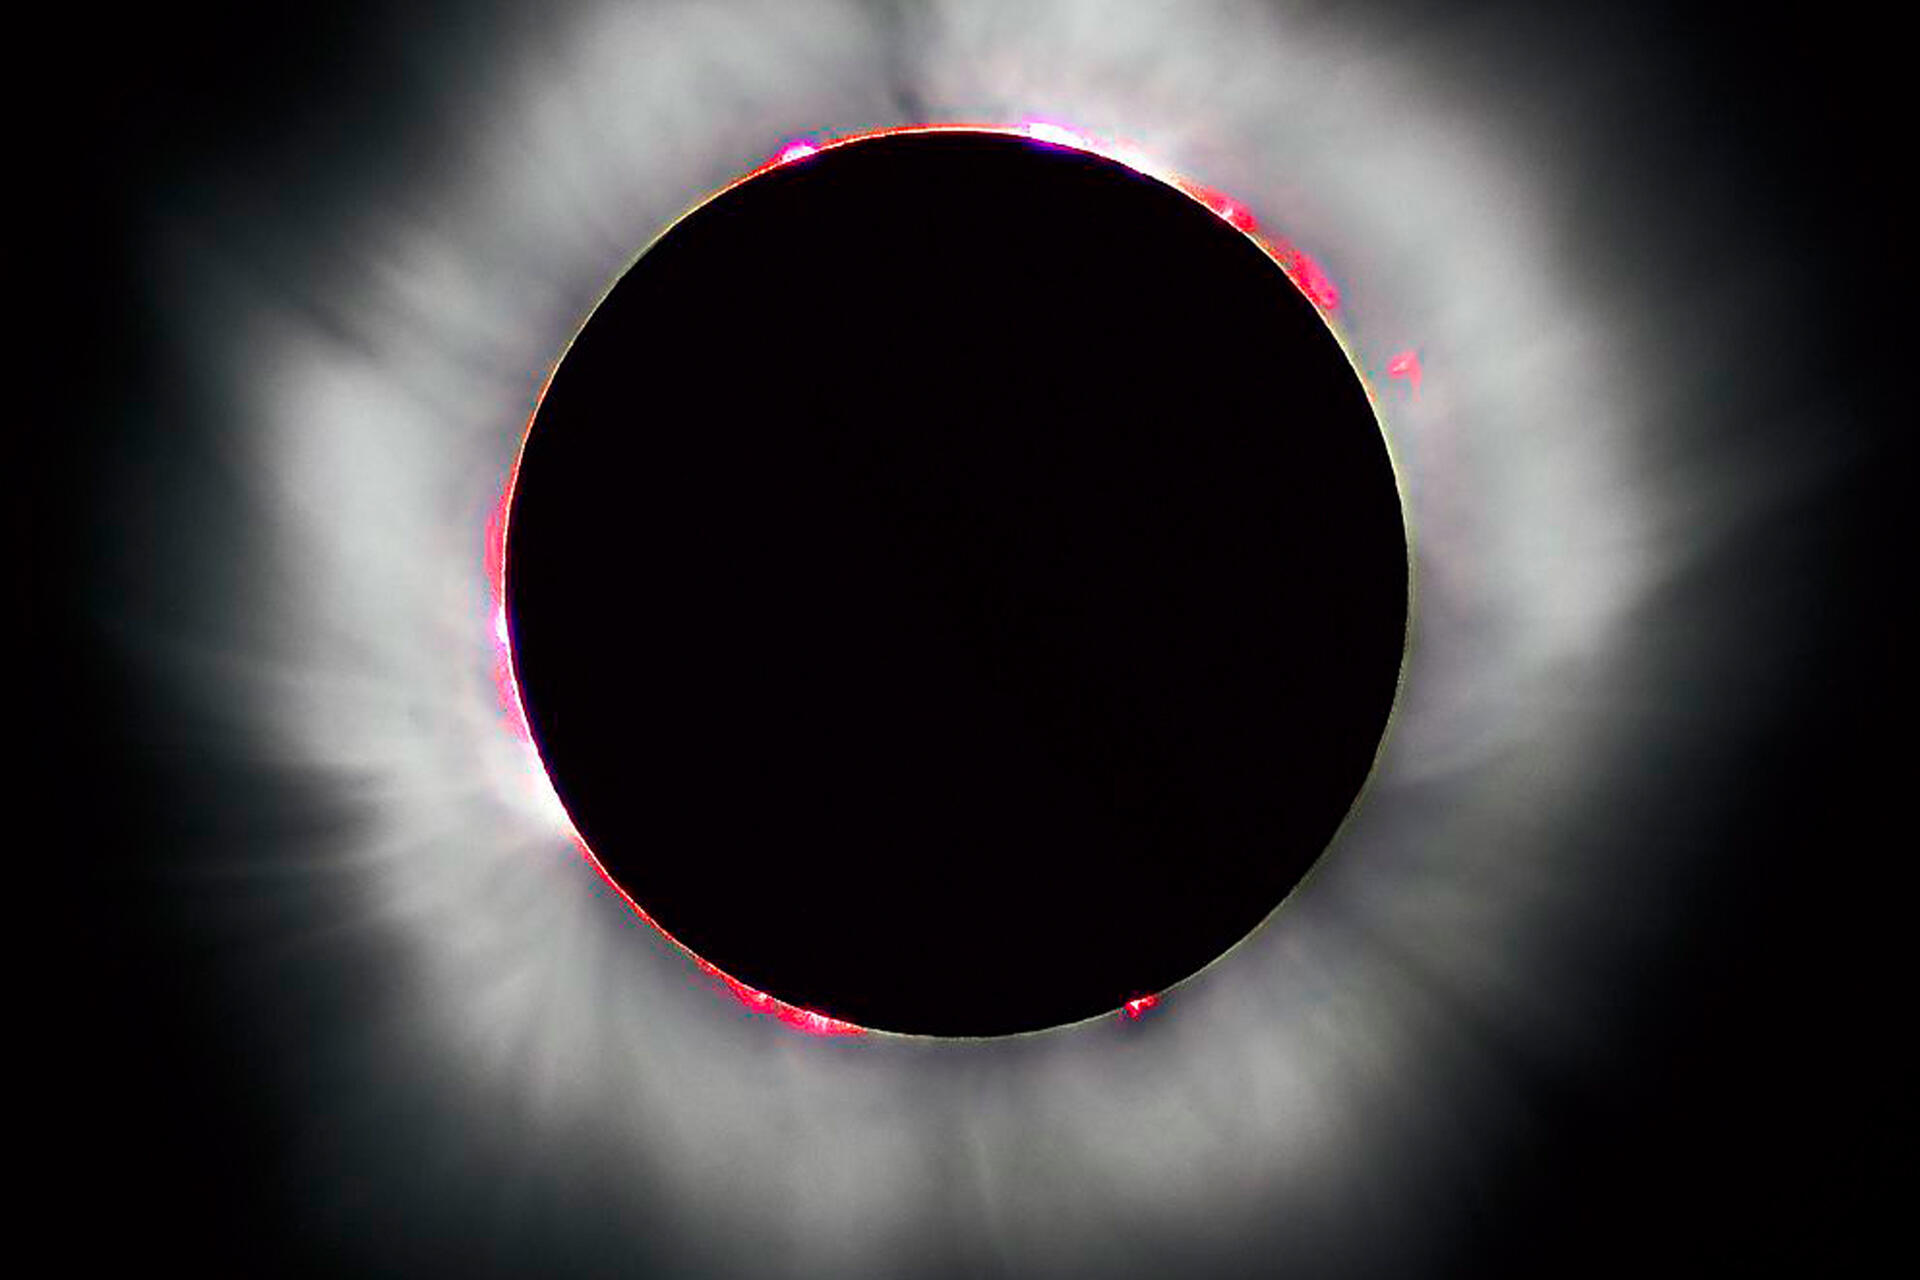 how do astronomers predict solar eclipses and how often does a total eclipse occur